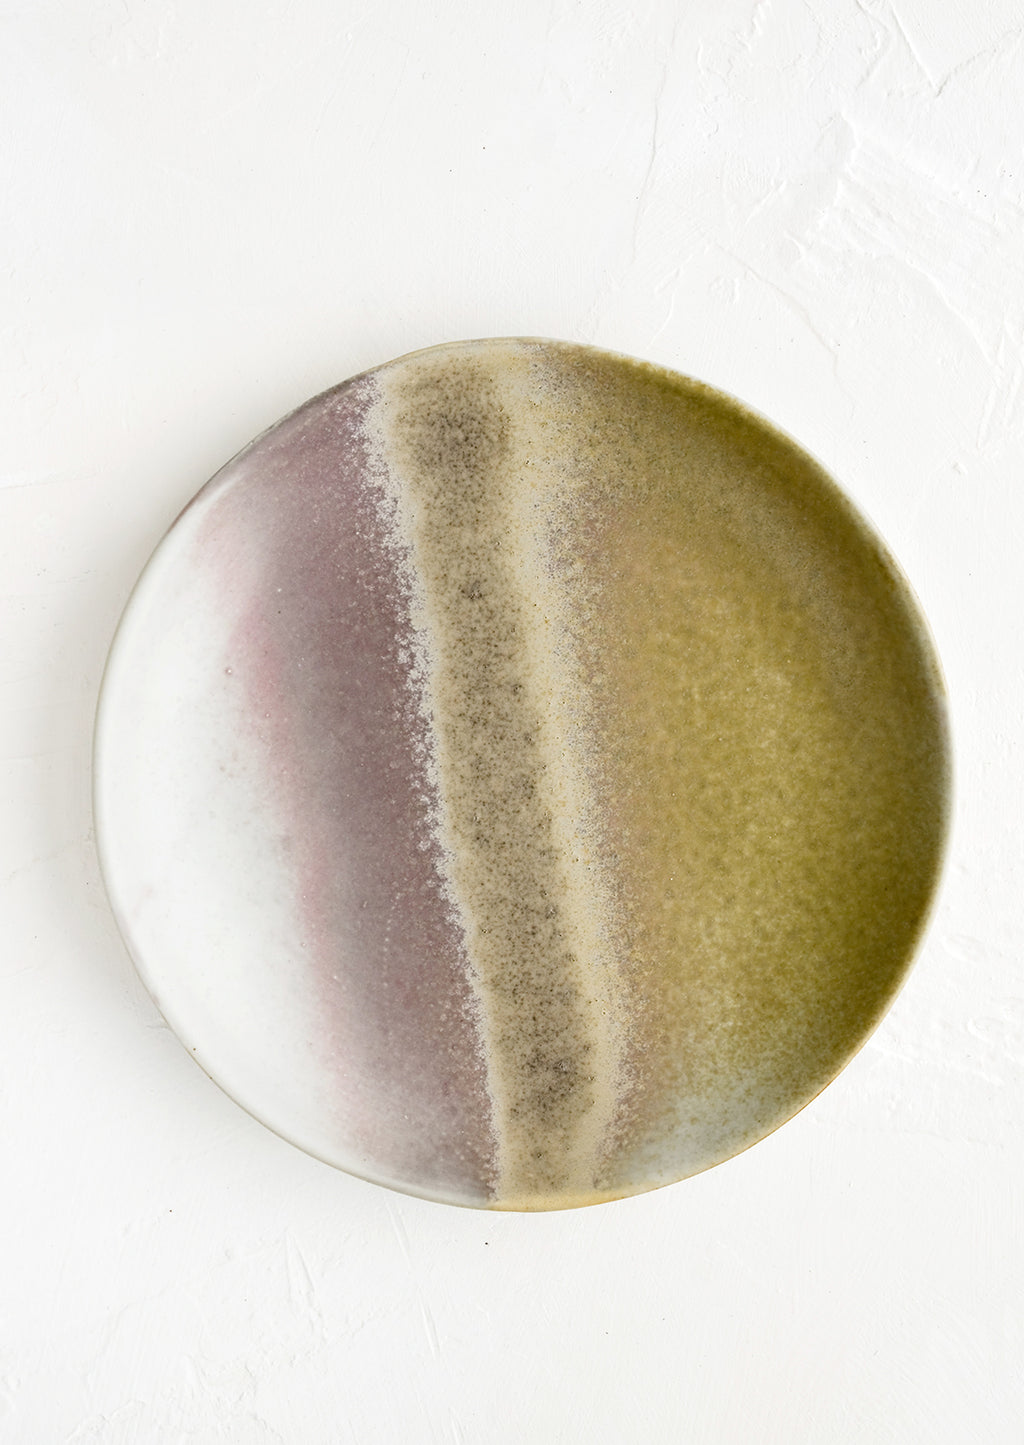 1: A round side plate with reactive glaze in mossy green-brown and grey-purple.